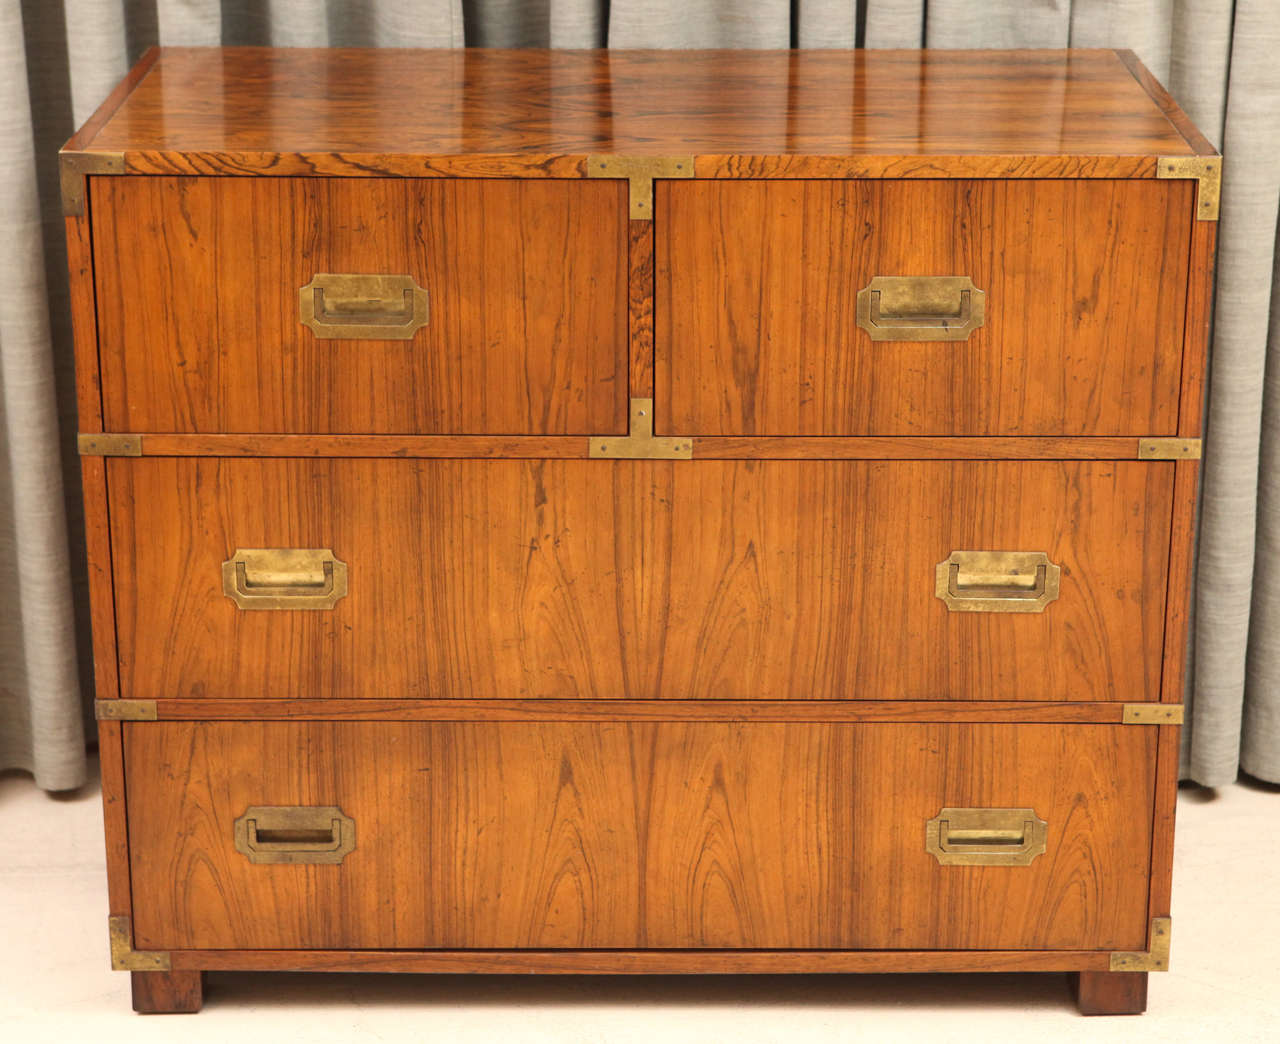 Rosewood Chest by Baker made for the Far East collection, circa 1960. Brazilian Rosewood at its best.